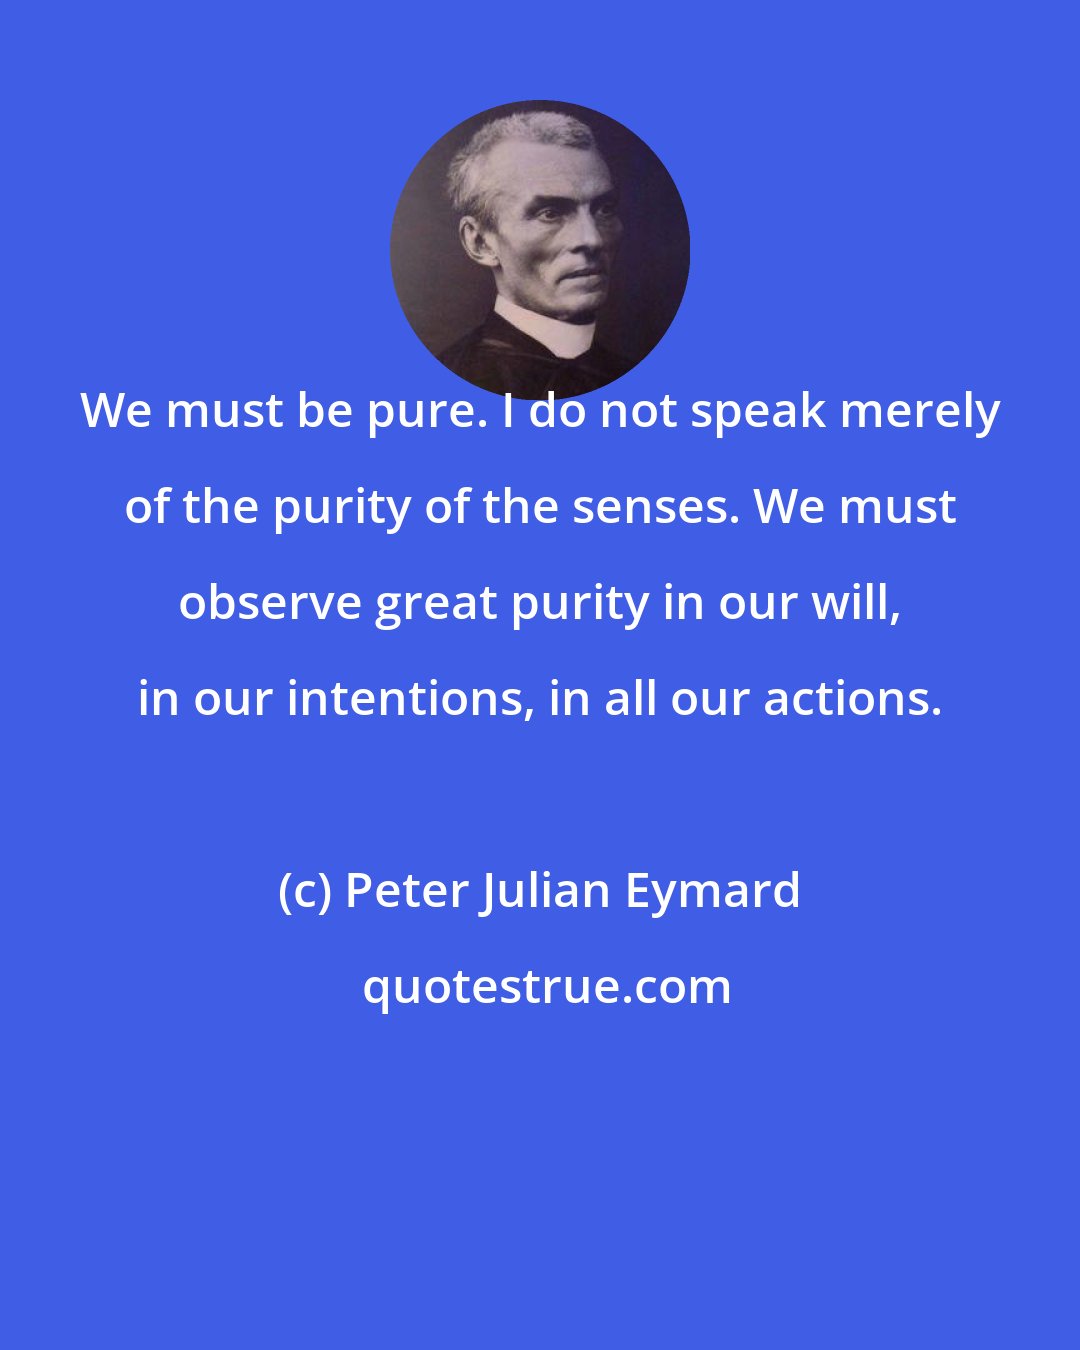 Peter Julian Eymard: We must be pure. I do not speak merely of the purity of the senses. We must observe great purity in our will, in our intentions, in all our actions.